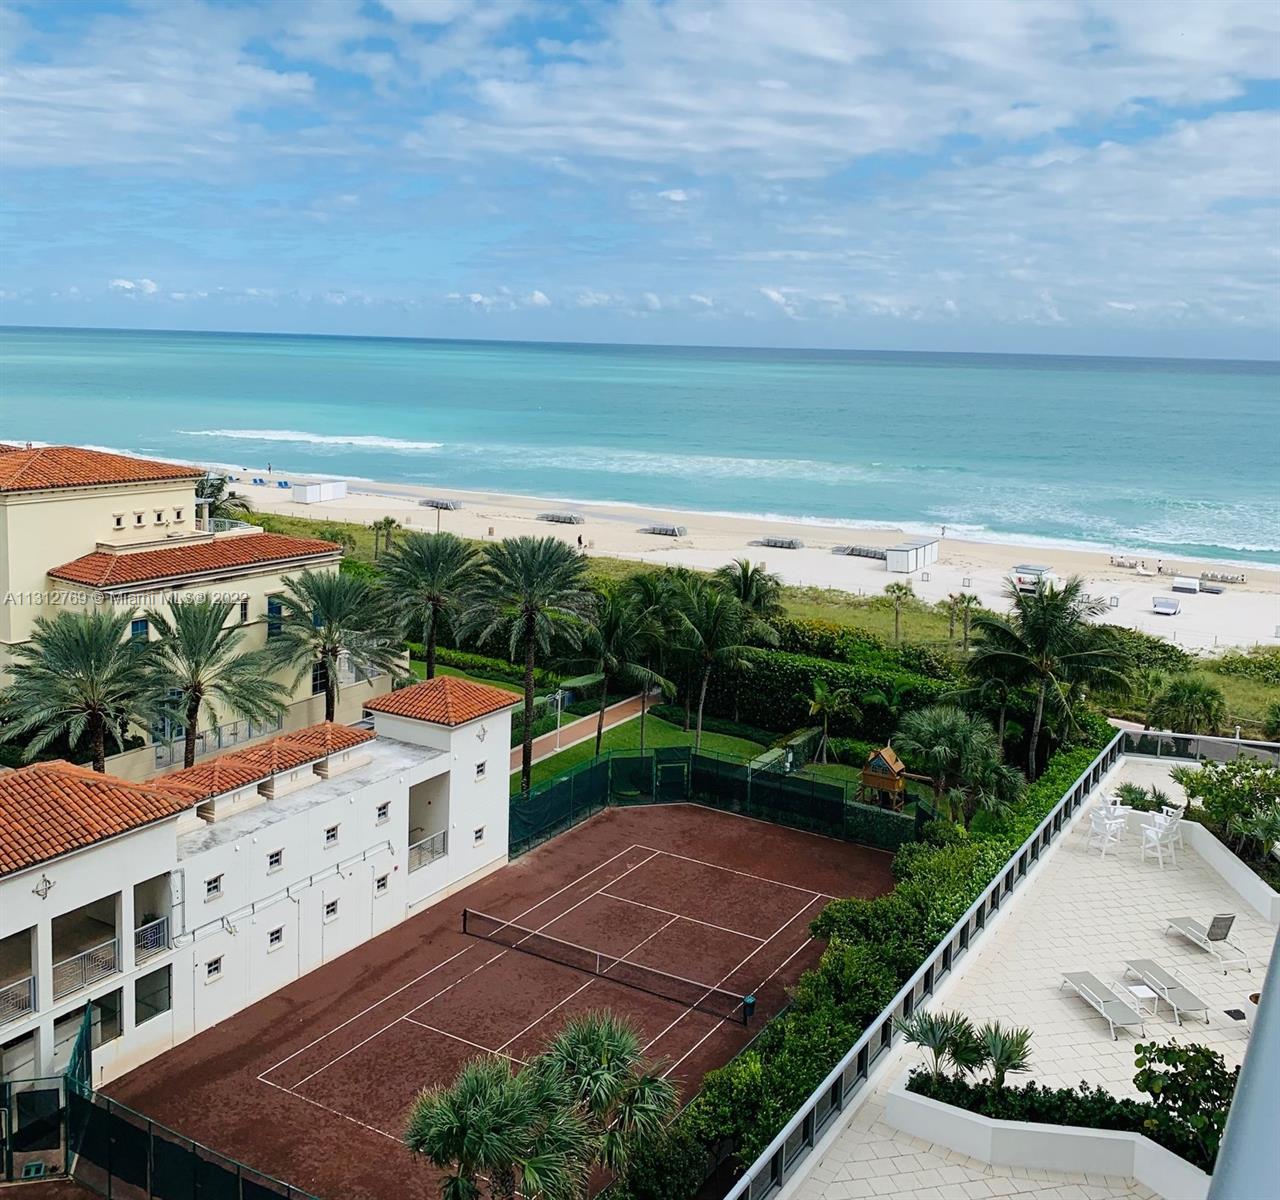 The renowned Mei Miami Beach 2BD/2.5BA with beautiful Ocean Views. This contemporary property features north-facing windows framing open sky and water vistas. Open living and dining areas lead to a remarkable 41-foot-wide-terrace. Enjoy an open kitchen with Thermador appliances. The split-bedroom layout features a primary suite with a walk-in closet and spa bathroom, Powder room, in-unit W/D, blinds. MEi offers a landscaped infinity pool, SPA, gardens, beach and pool service, a clubhouse, library, lounge, a state-of-the-art fitness center, 24-hour attended lobby and valet parking. Outstanding Millionaires Row location close to great golf courses and South Beach hot spots.